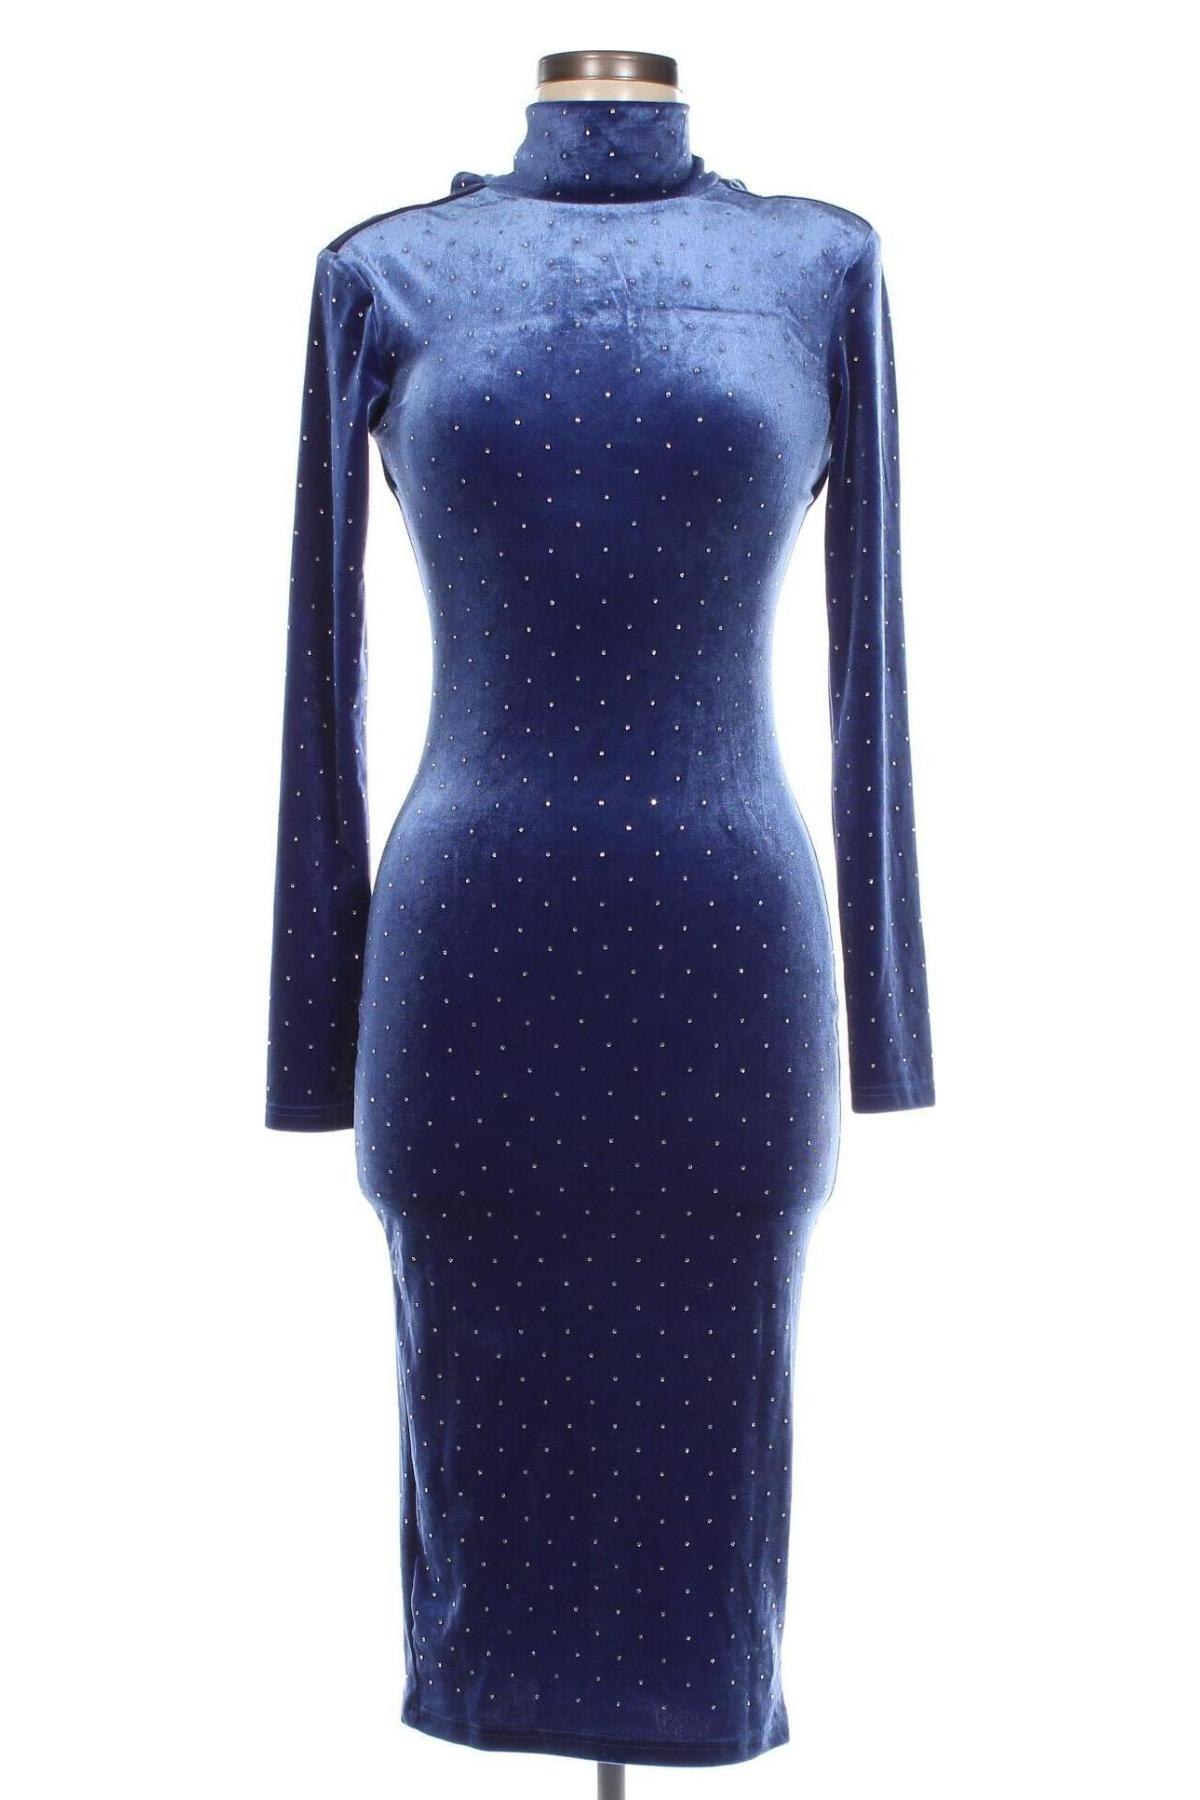 Kleid Katy Perry exclusive for ABOUT YOU, Größe XS, Farbe Blau, Preis 39,69 €